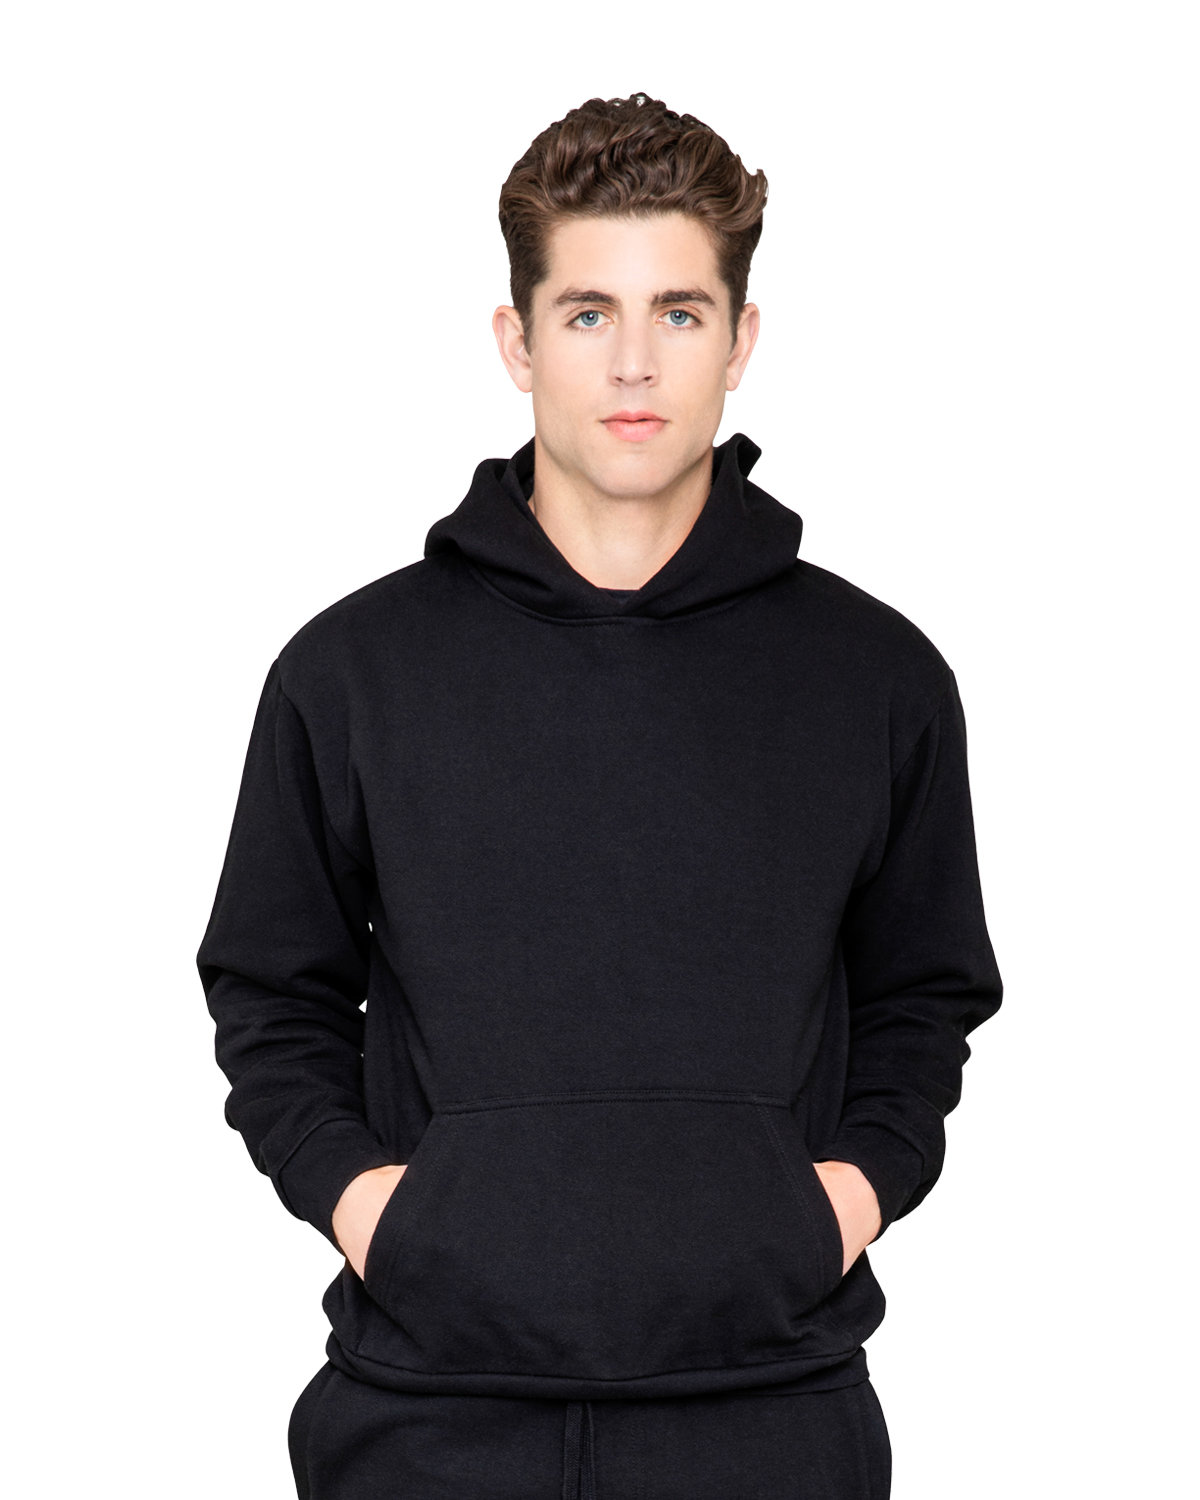 A young man with dark hair wearing a black hoodie standing against a white background.